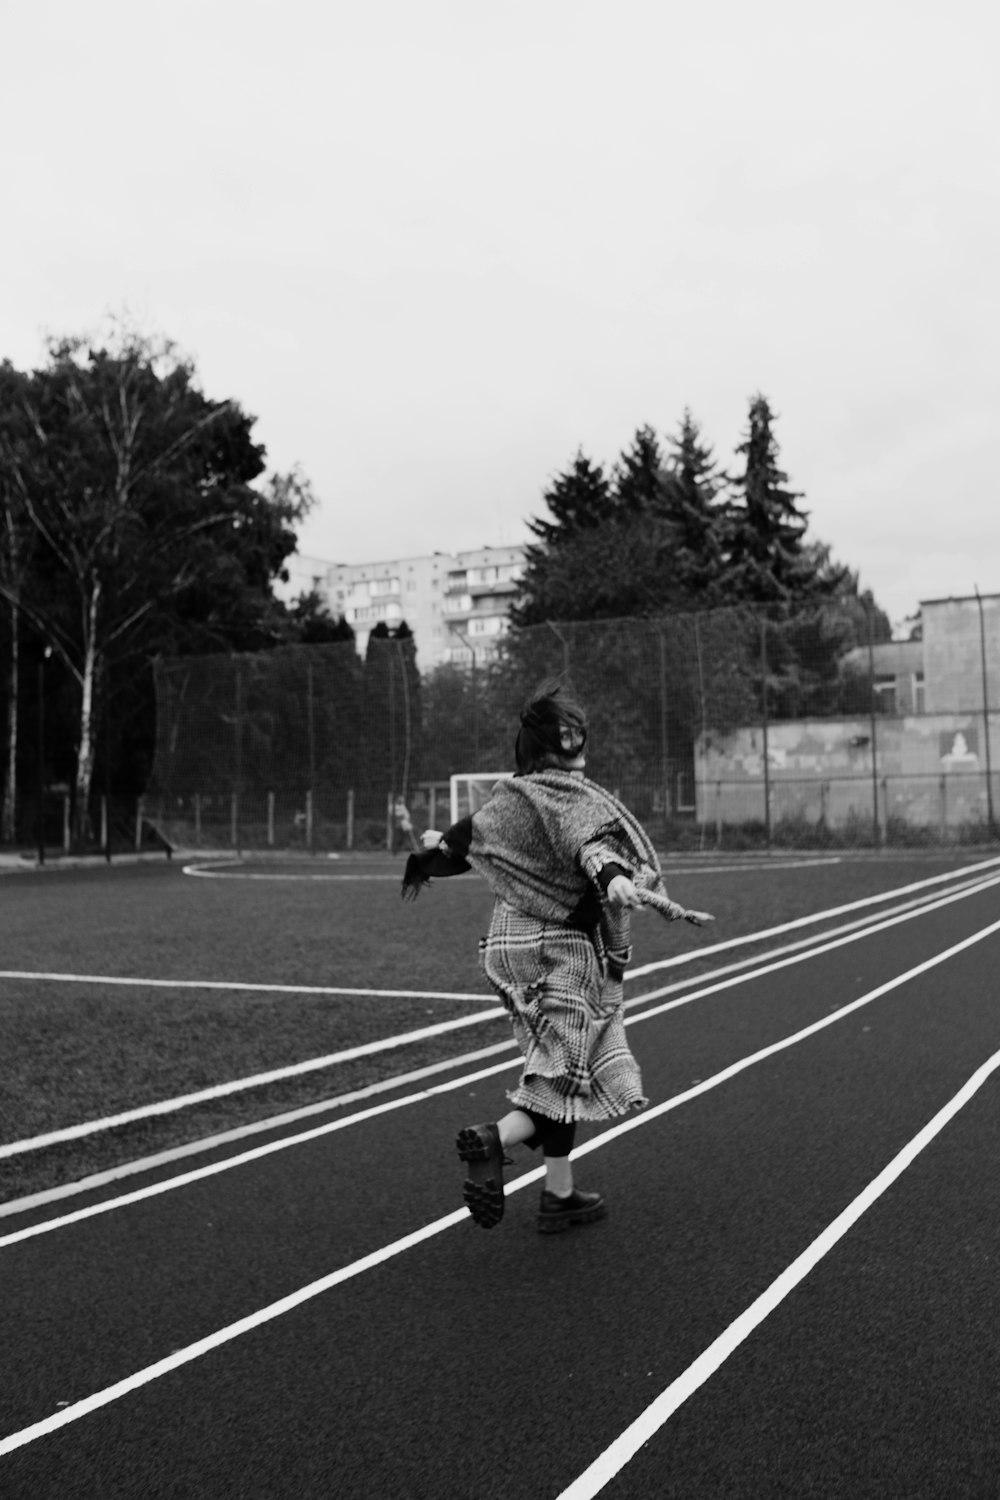 a person running on a track in a field